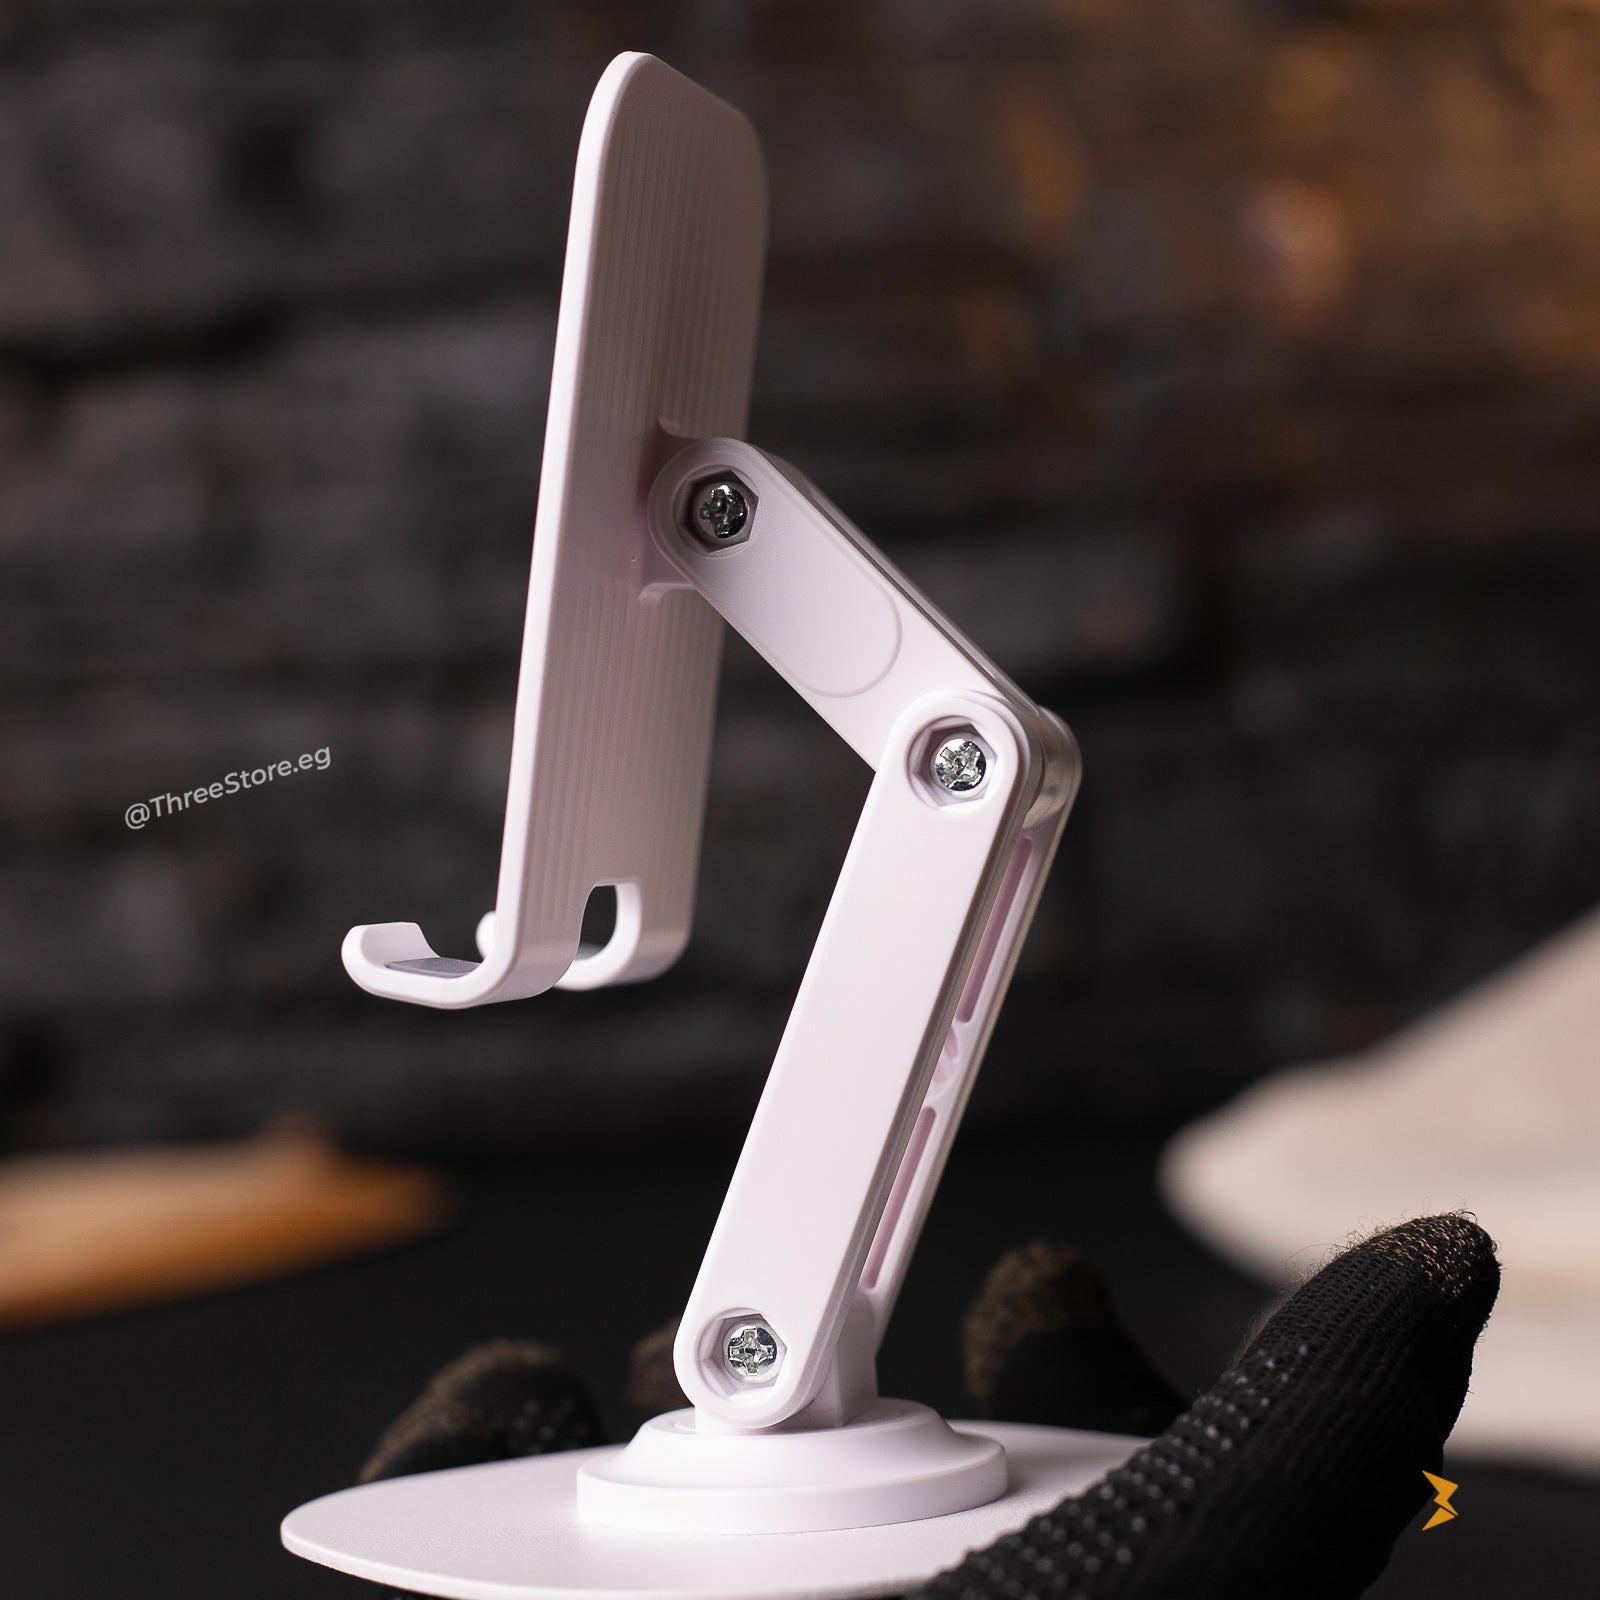 Go-Des Foldable 360° Rotating Metal Stand GD-HD757